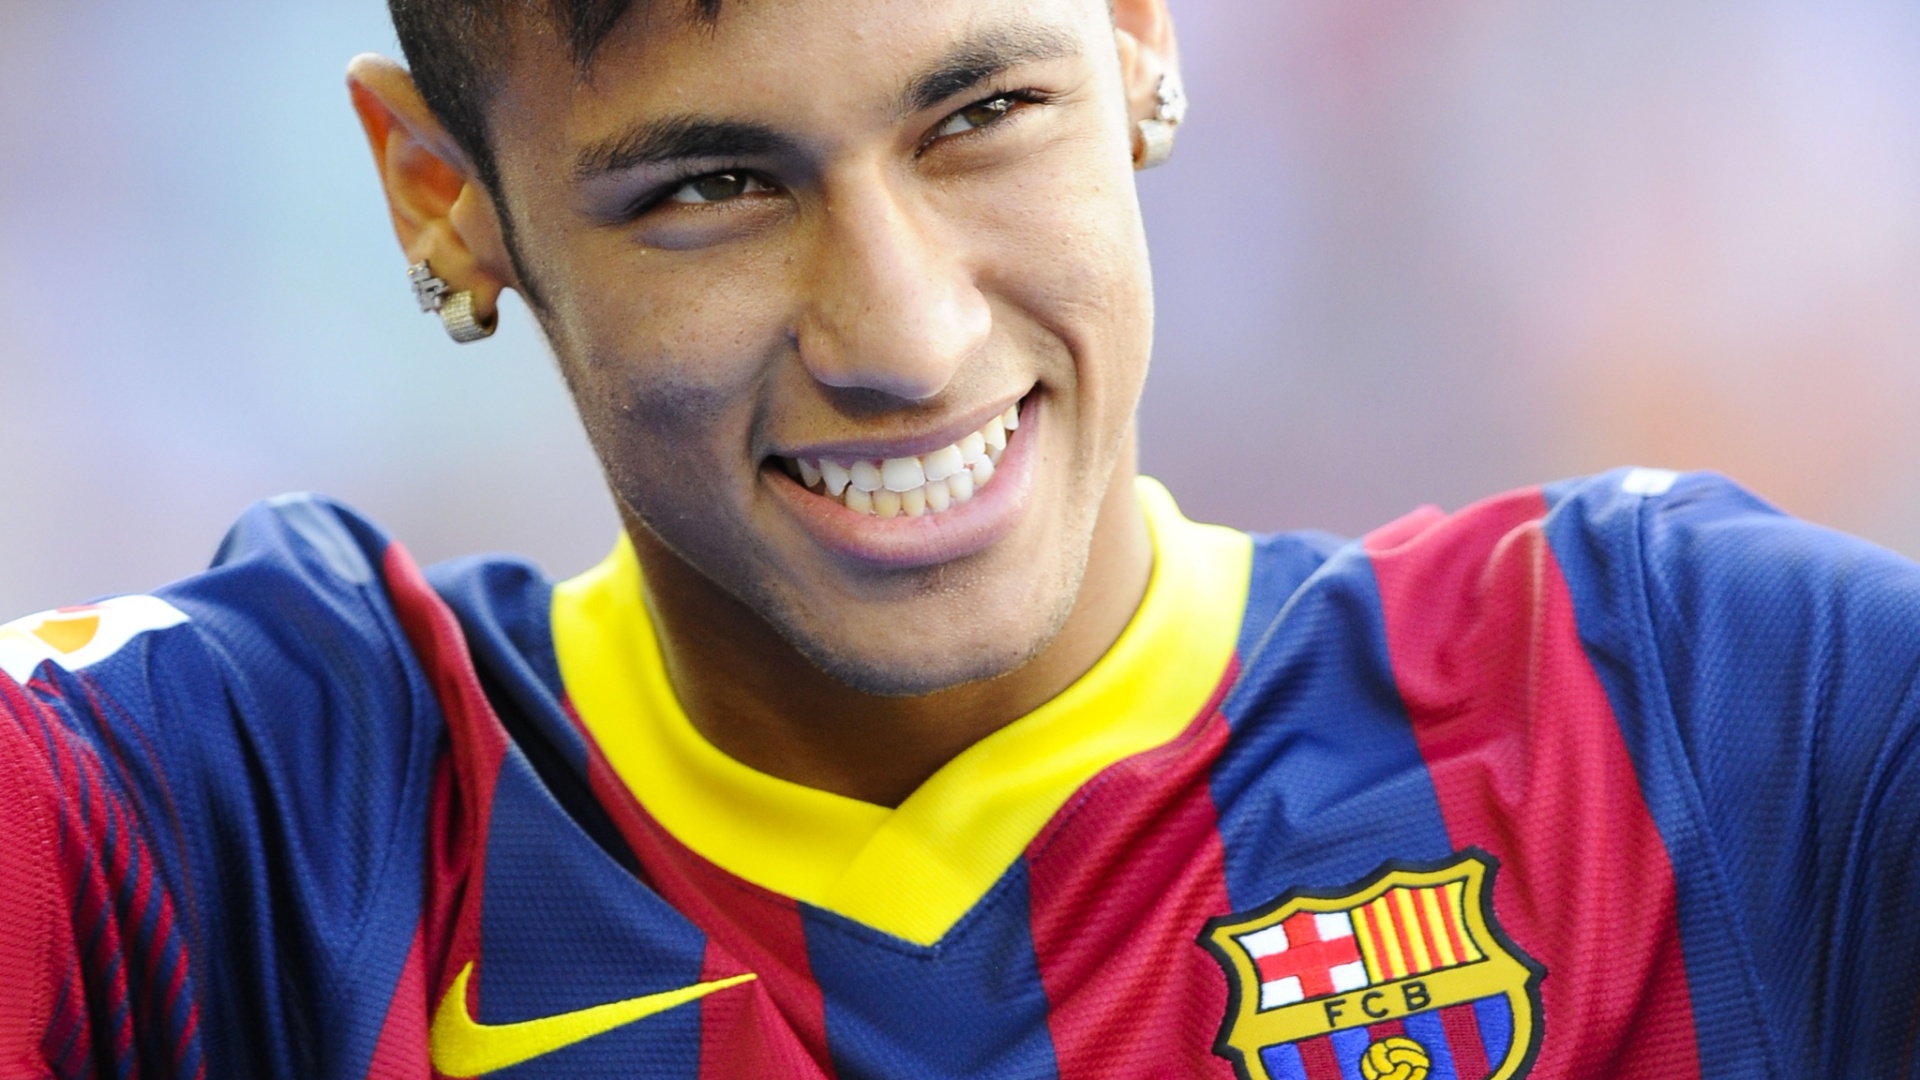 Barcelona Neymar smiling wallpaper and image, picture, photo